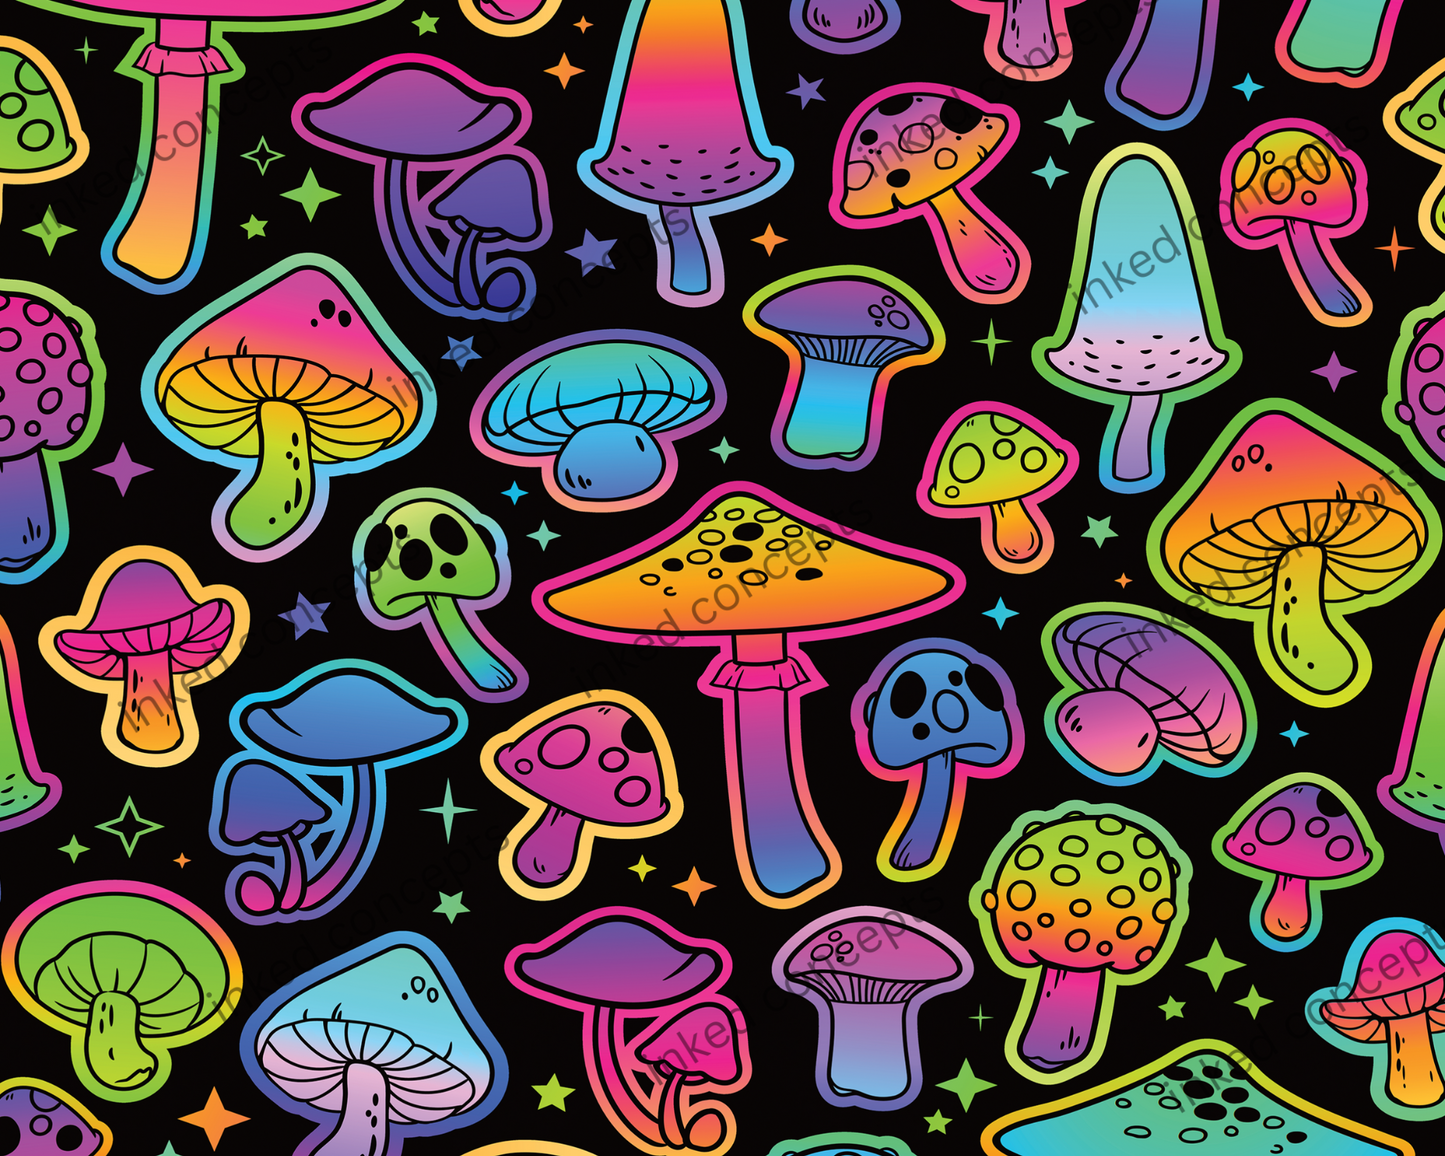 Mushrooms Make Me Happy (Glow Available)